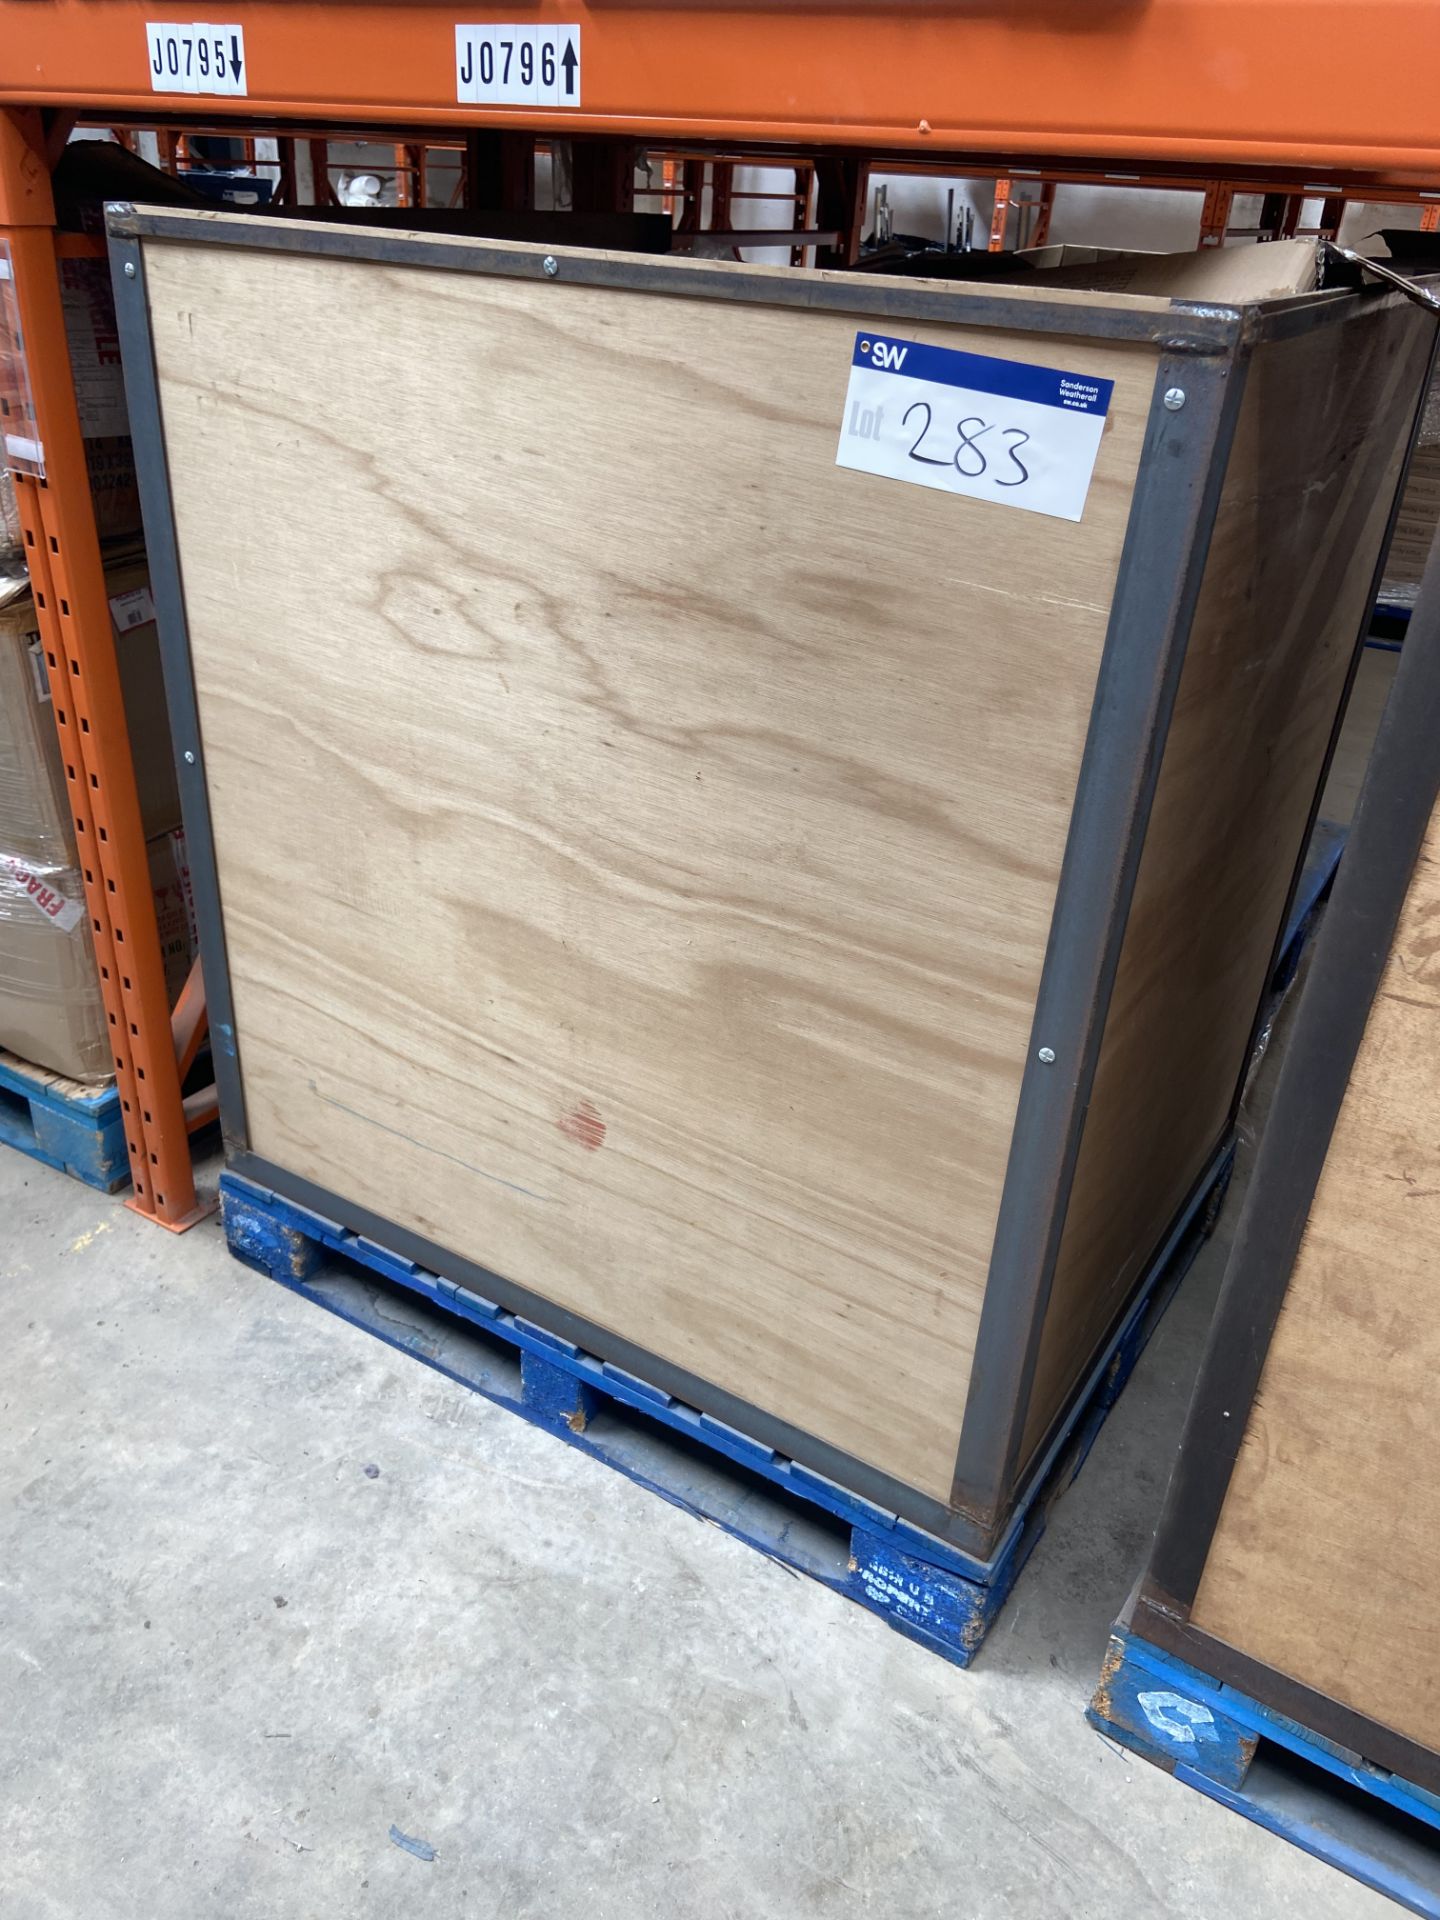 Steel Framed Packing Box, with contents of empty cardboard boxes (J0795), Lot located 33-37 Carron